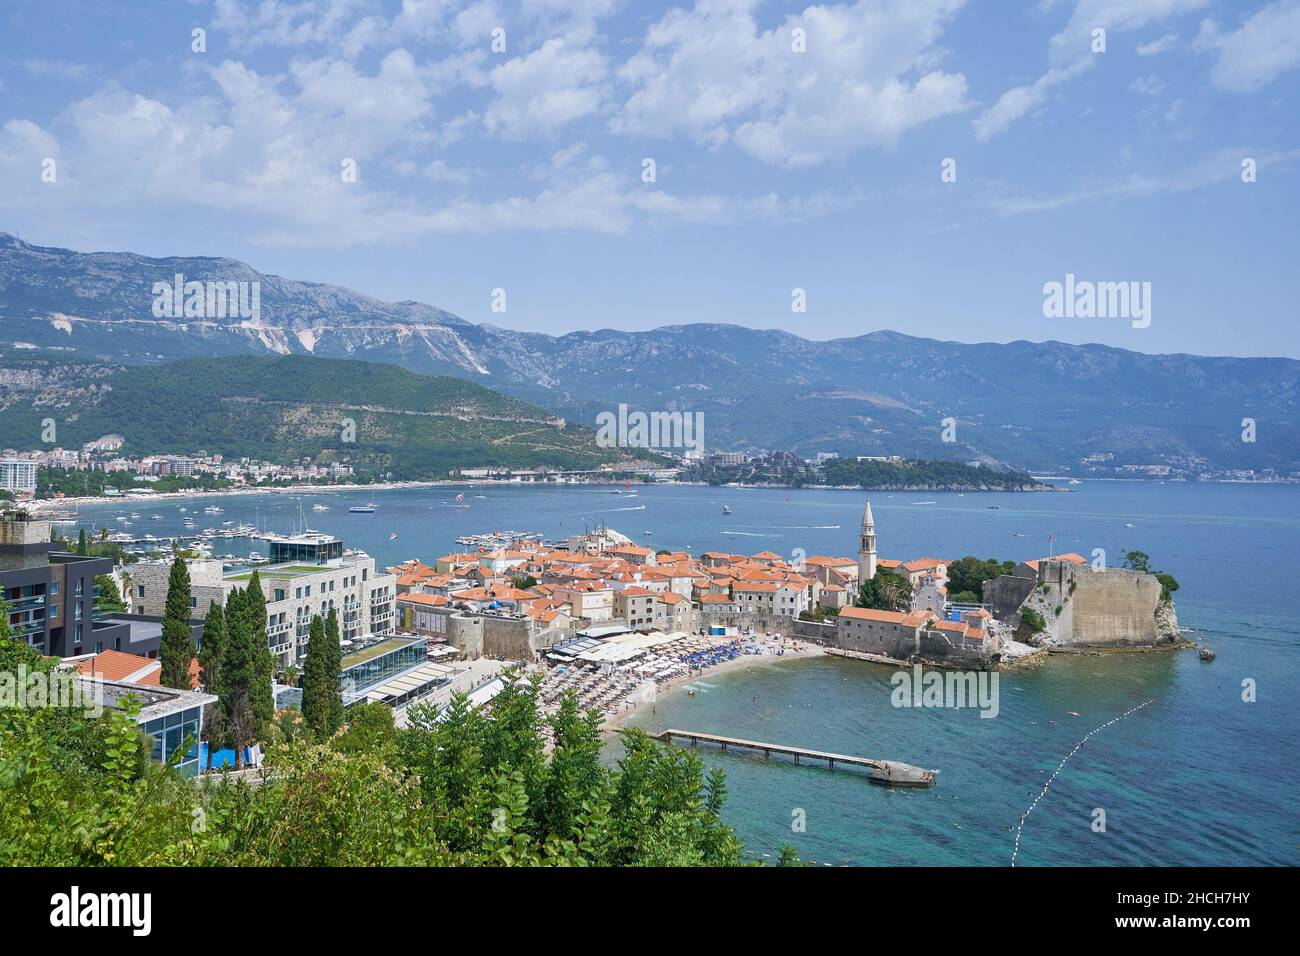 Aerial view of the old town in Budva, Montenegro. Stock Photo